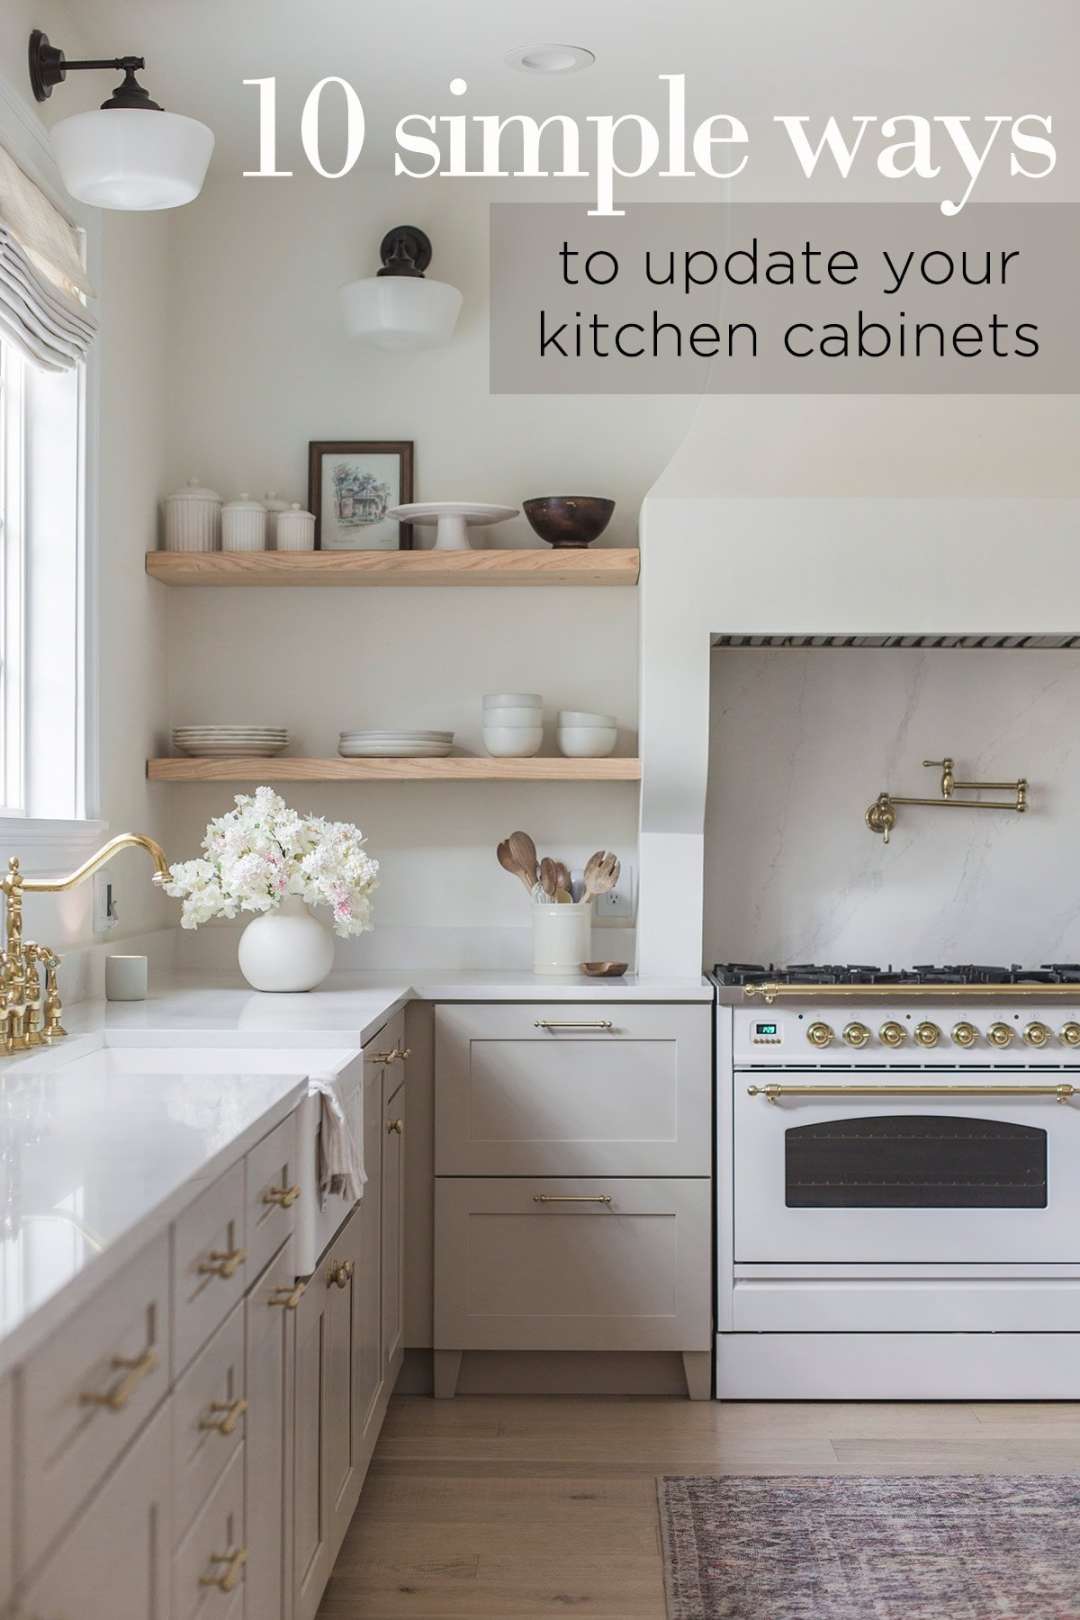 Simple Ideas to Update your Kitchen Cabinets - Jenna Sue Design